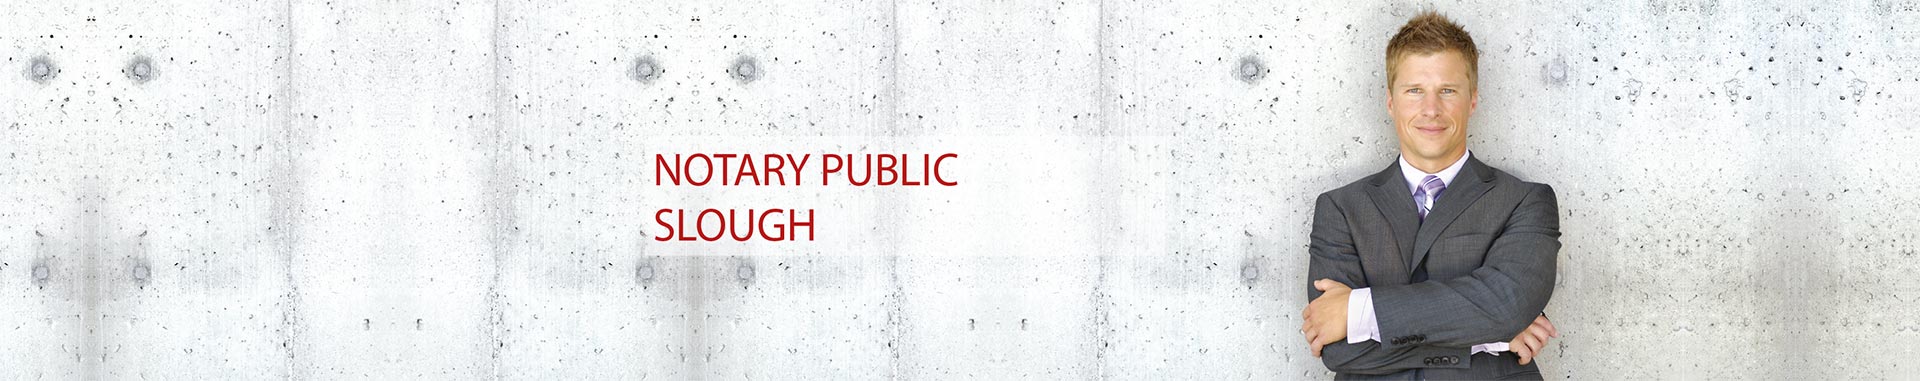 Notary Public Slough